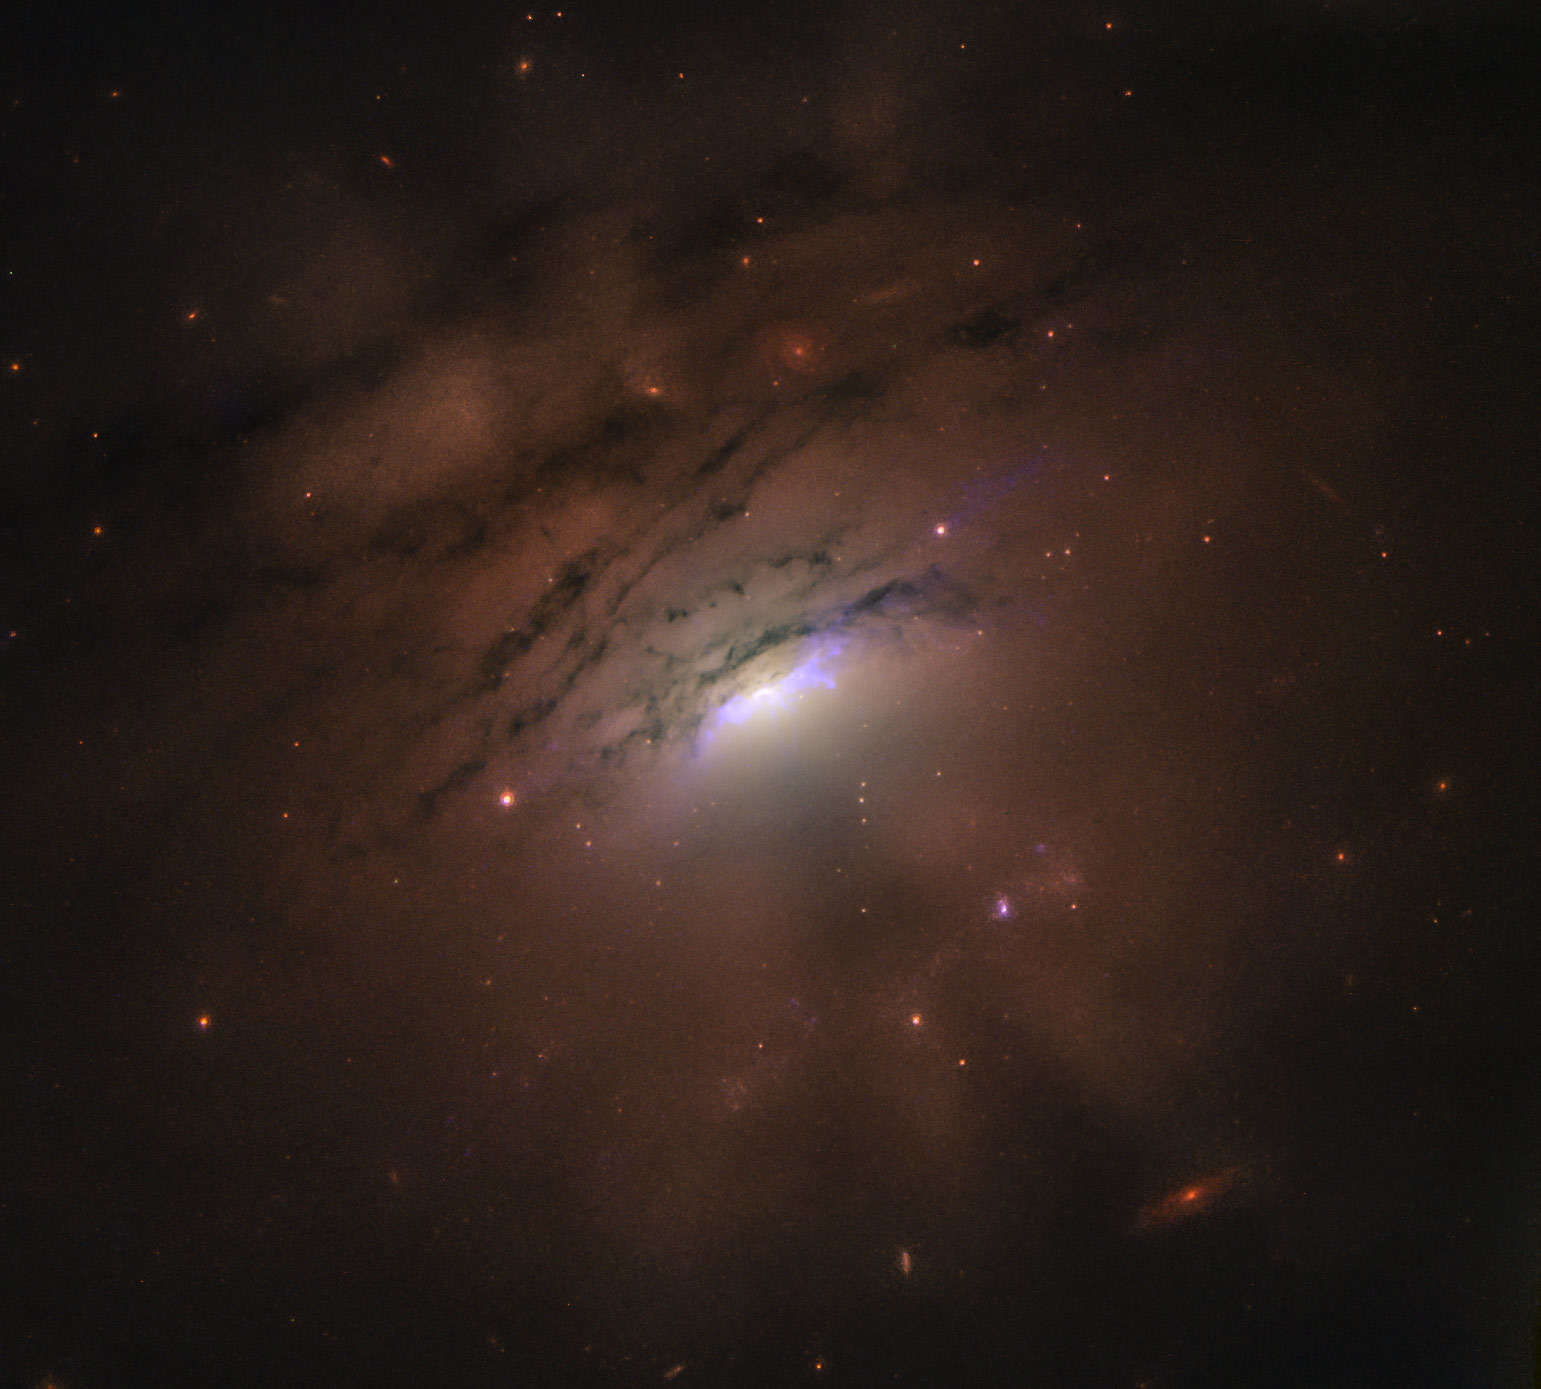 IC 5063 is an active galaxy where shadows tens of thousands of light years long are being cast from the center. Credit: NASA, ESA, STScI and W. P . Maksym (CfA)